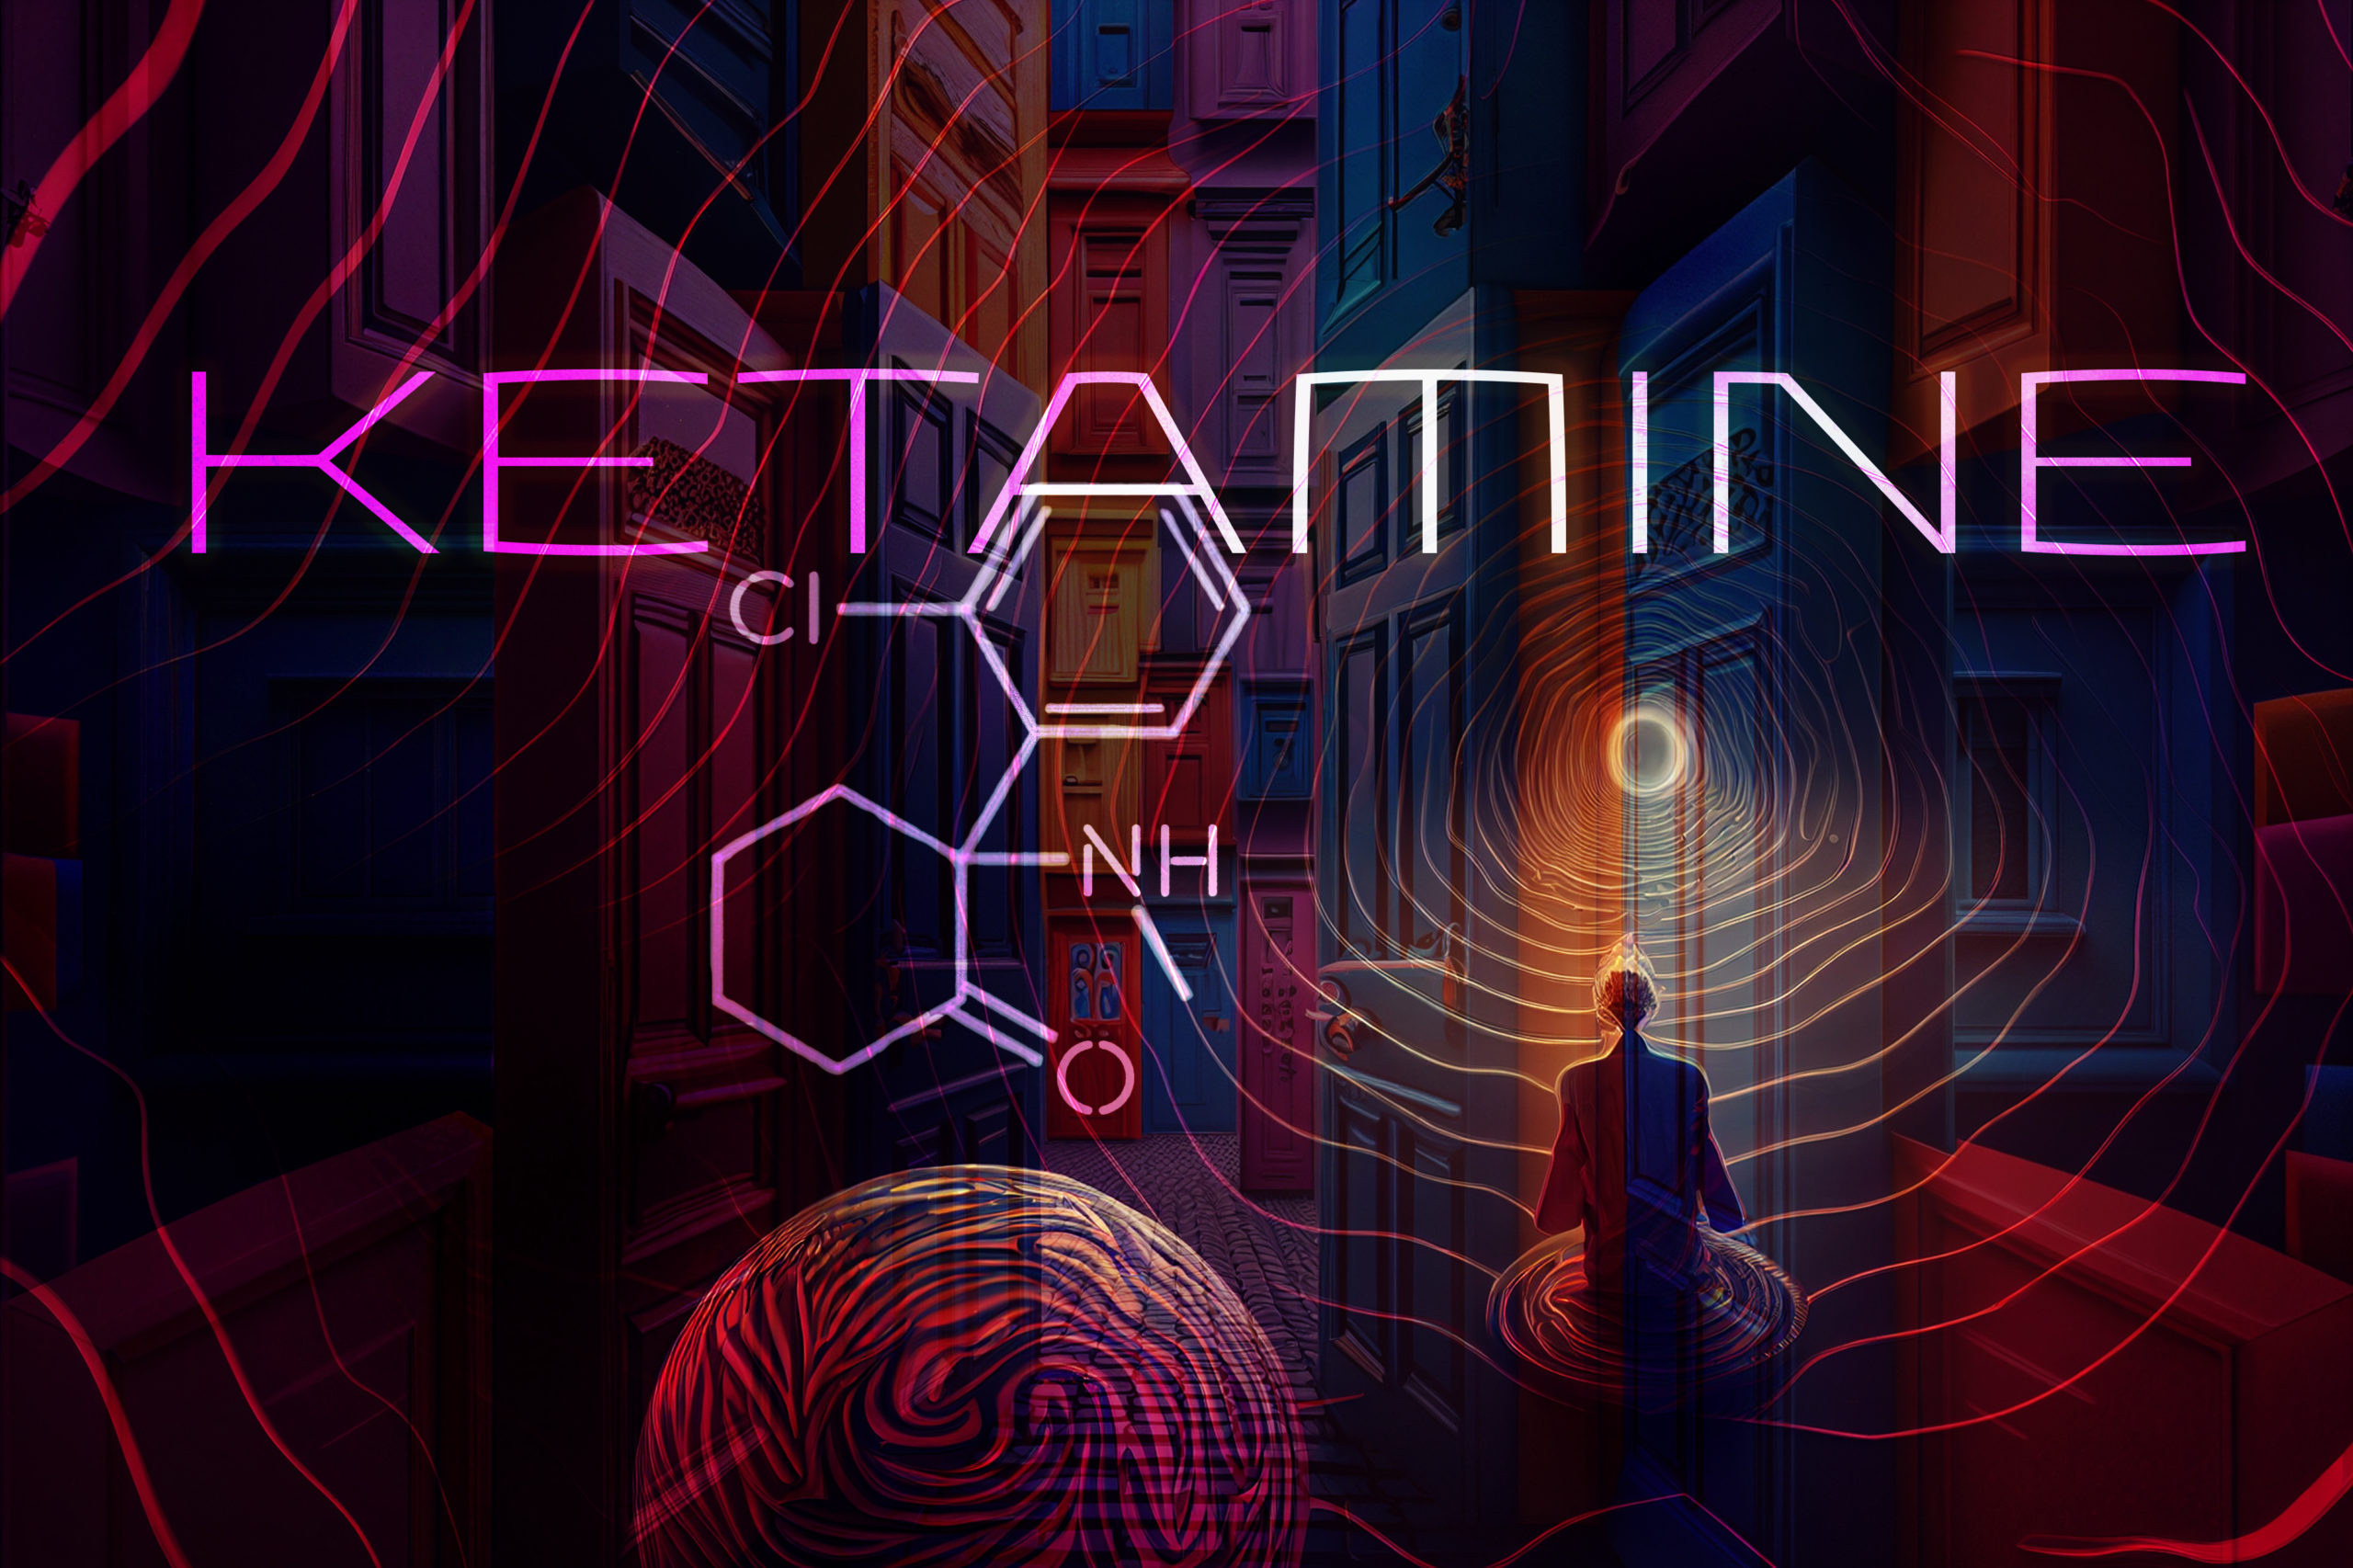 Ketamine Treatment The Science Behind Mental Health Relief - Dr. Jeff Ditzell in NYC